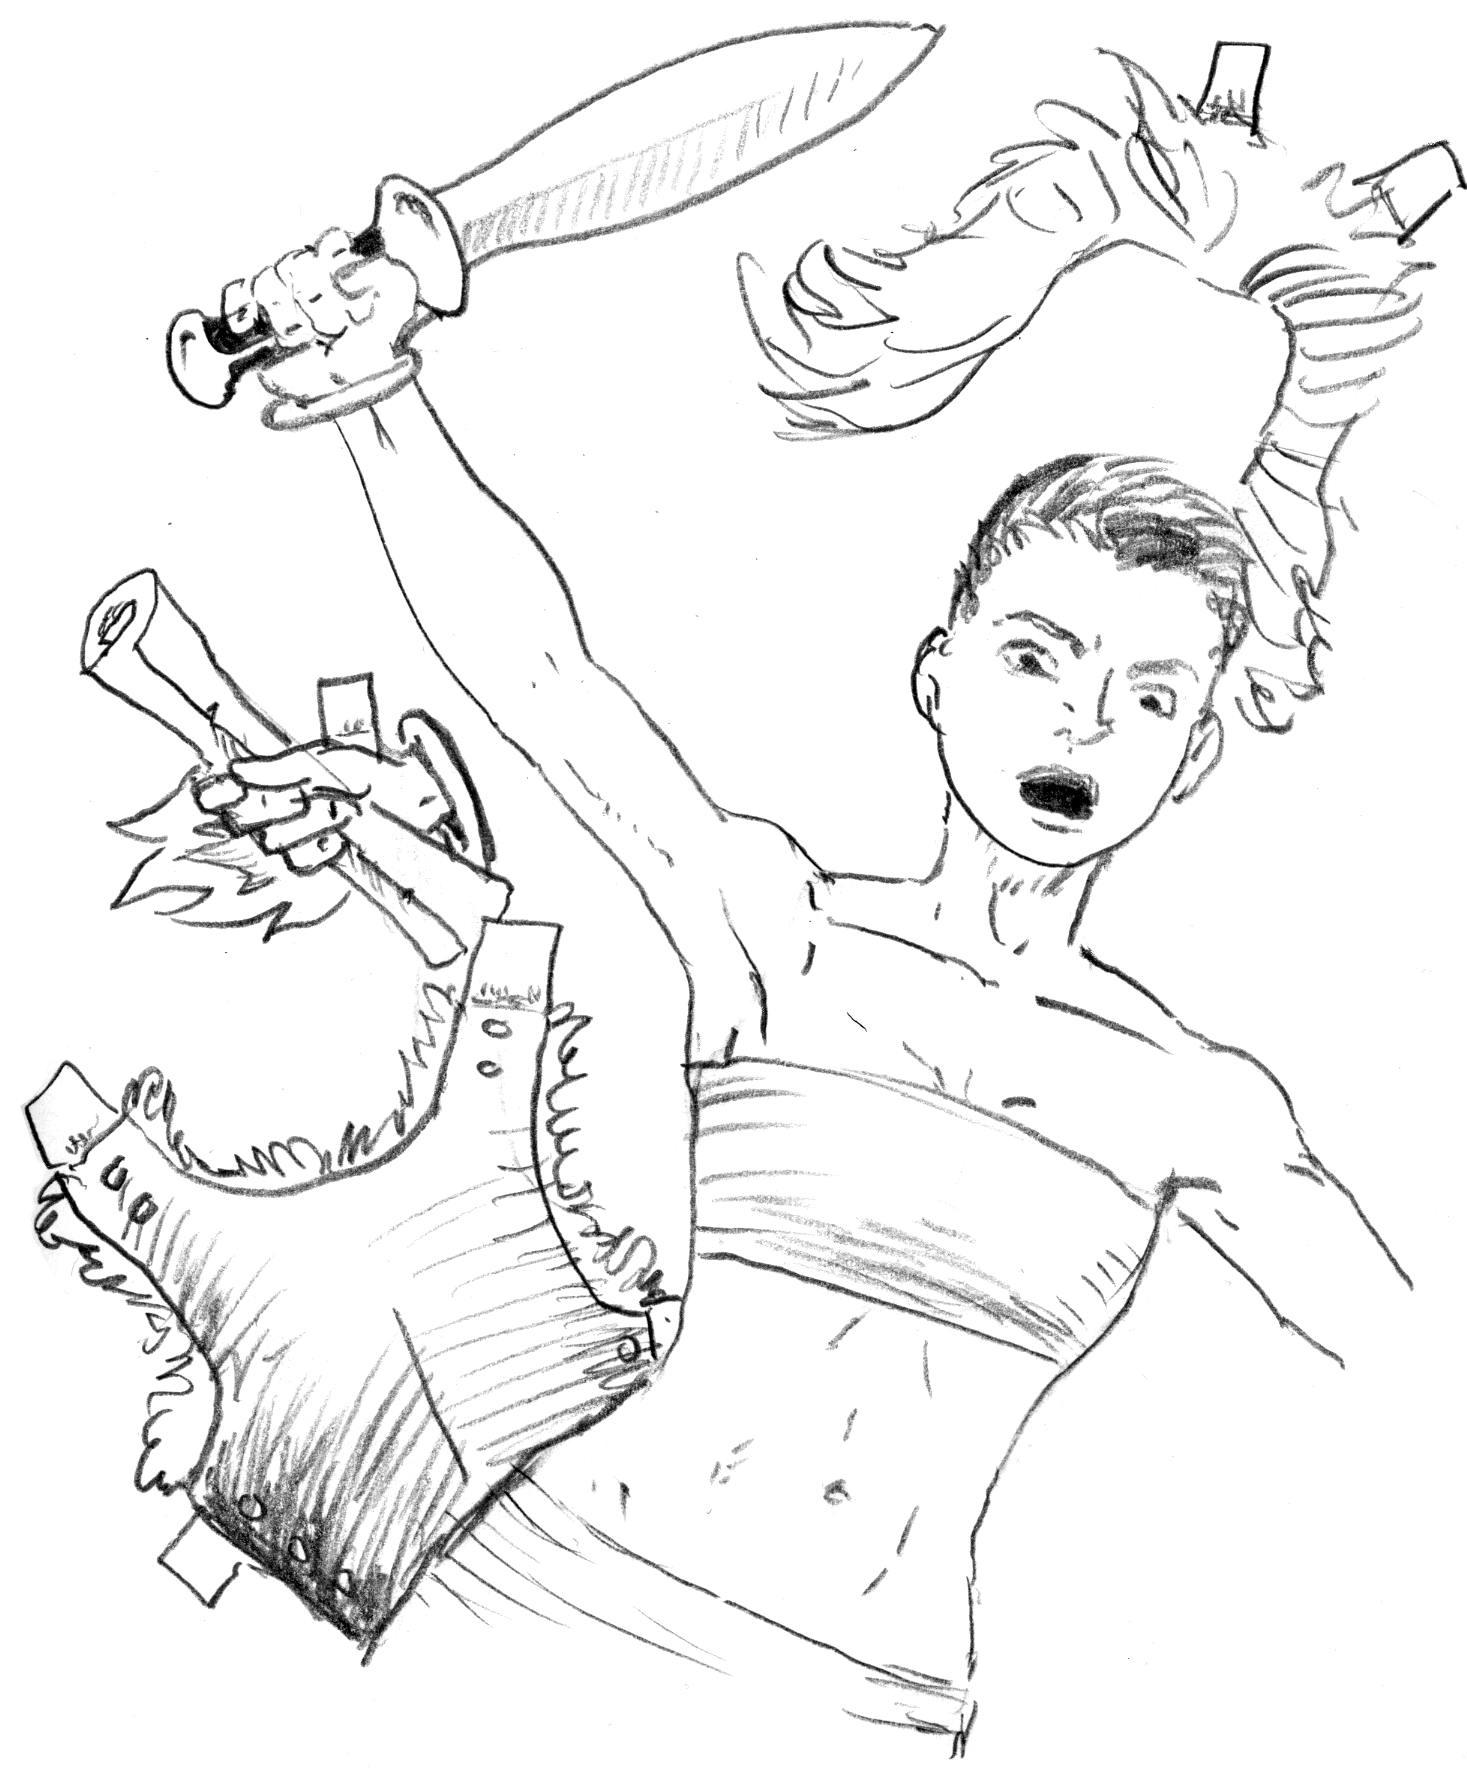 A cut-out paper doll of a female fantasy adventurer, with paper armor, hair, and accessories strewn around her